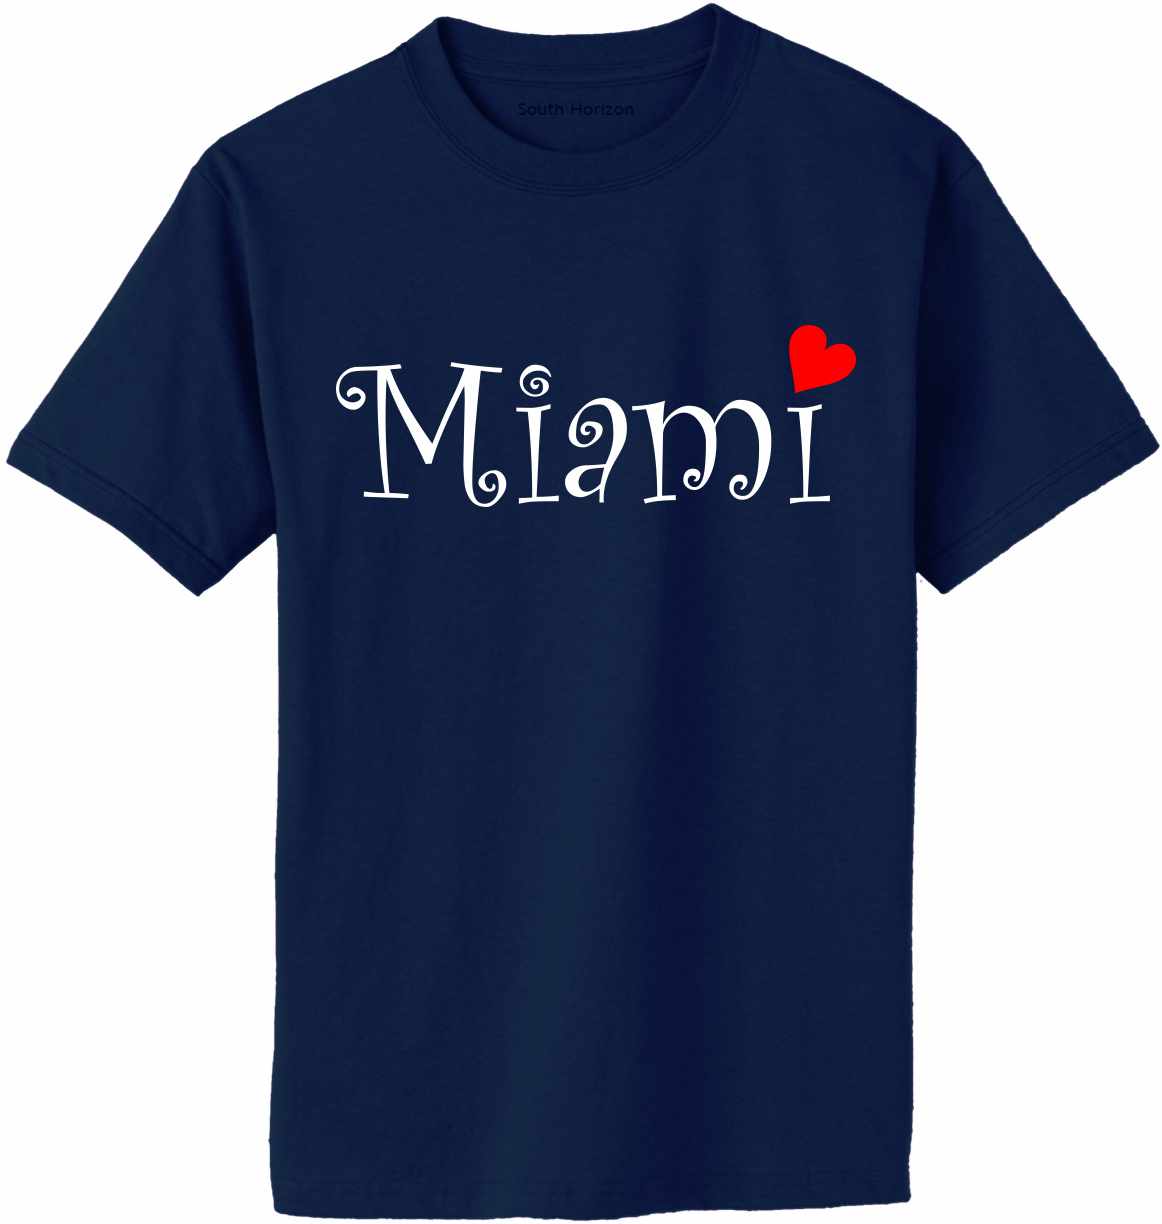 Miami City on Adult T-Shirt (#1331-1)